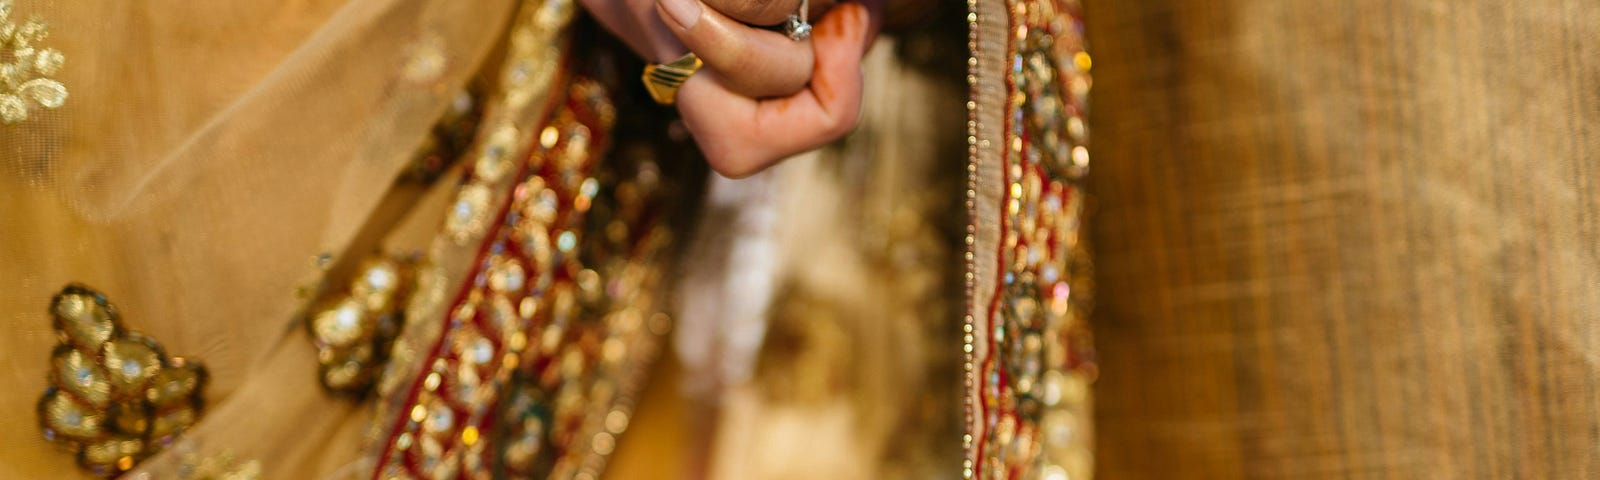 A newly married Indian couple, holding hands.